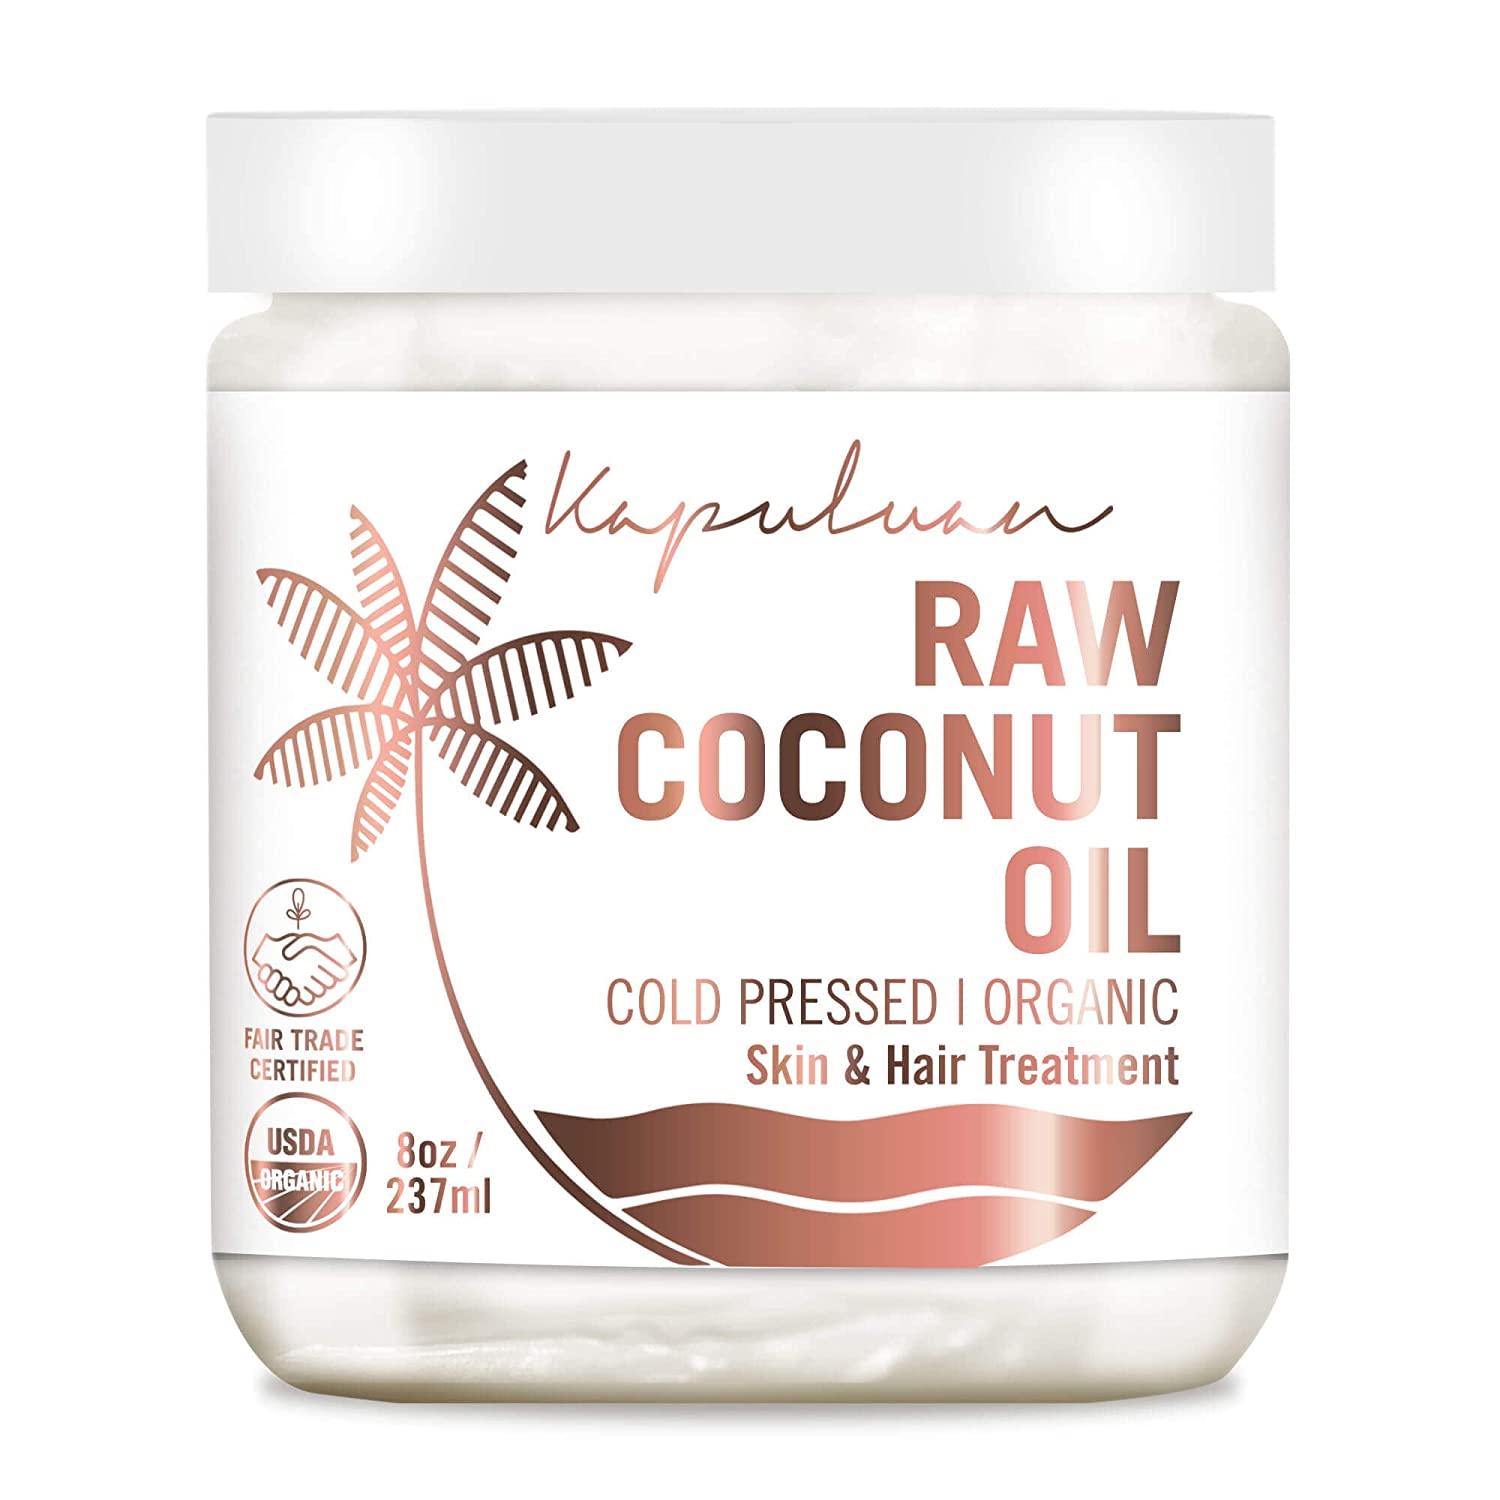 Jar of organic raw coconut oil for coconut skin and hair treatment, cold-pressed and fair trade certified.